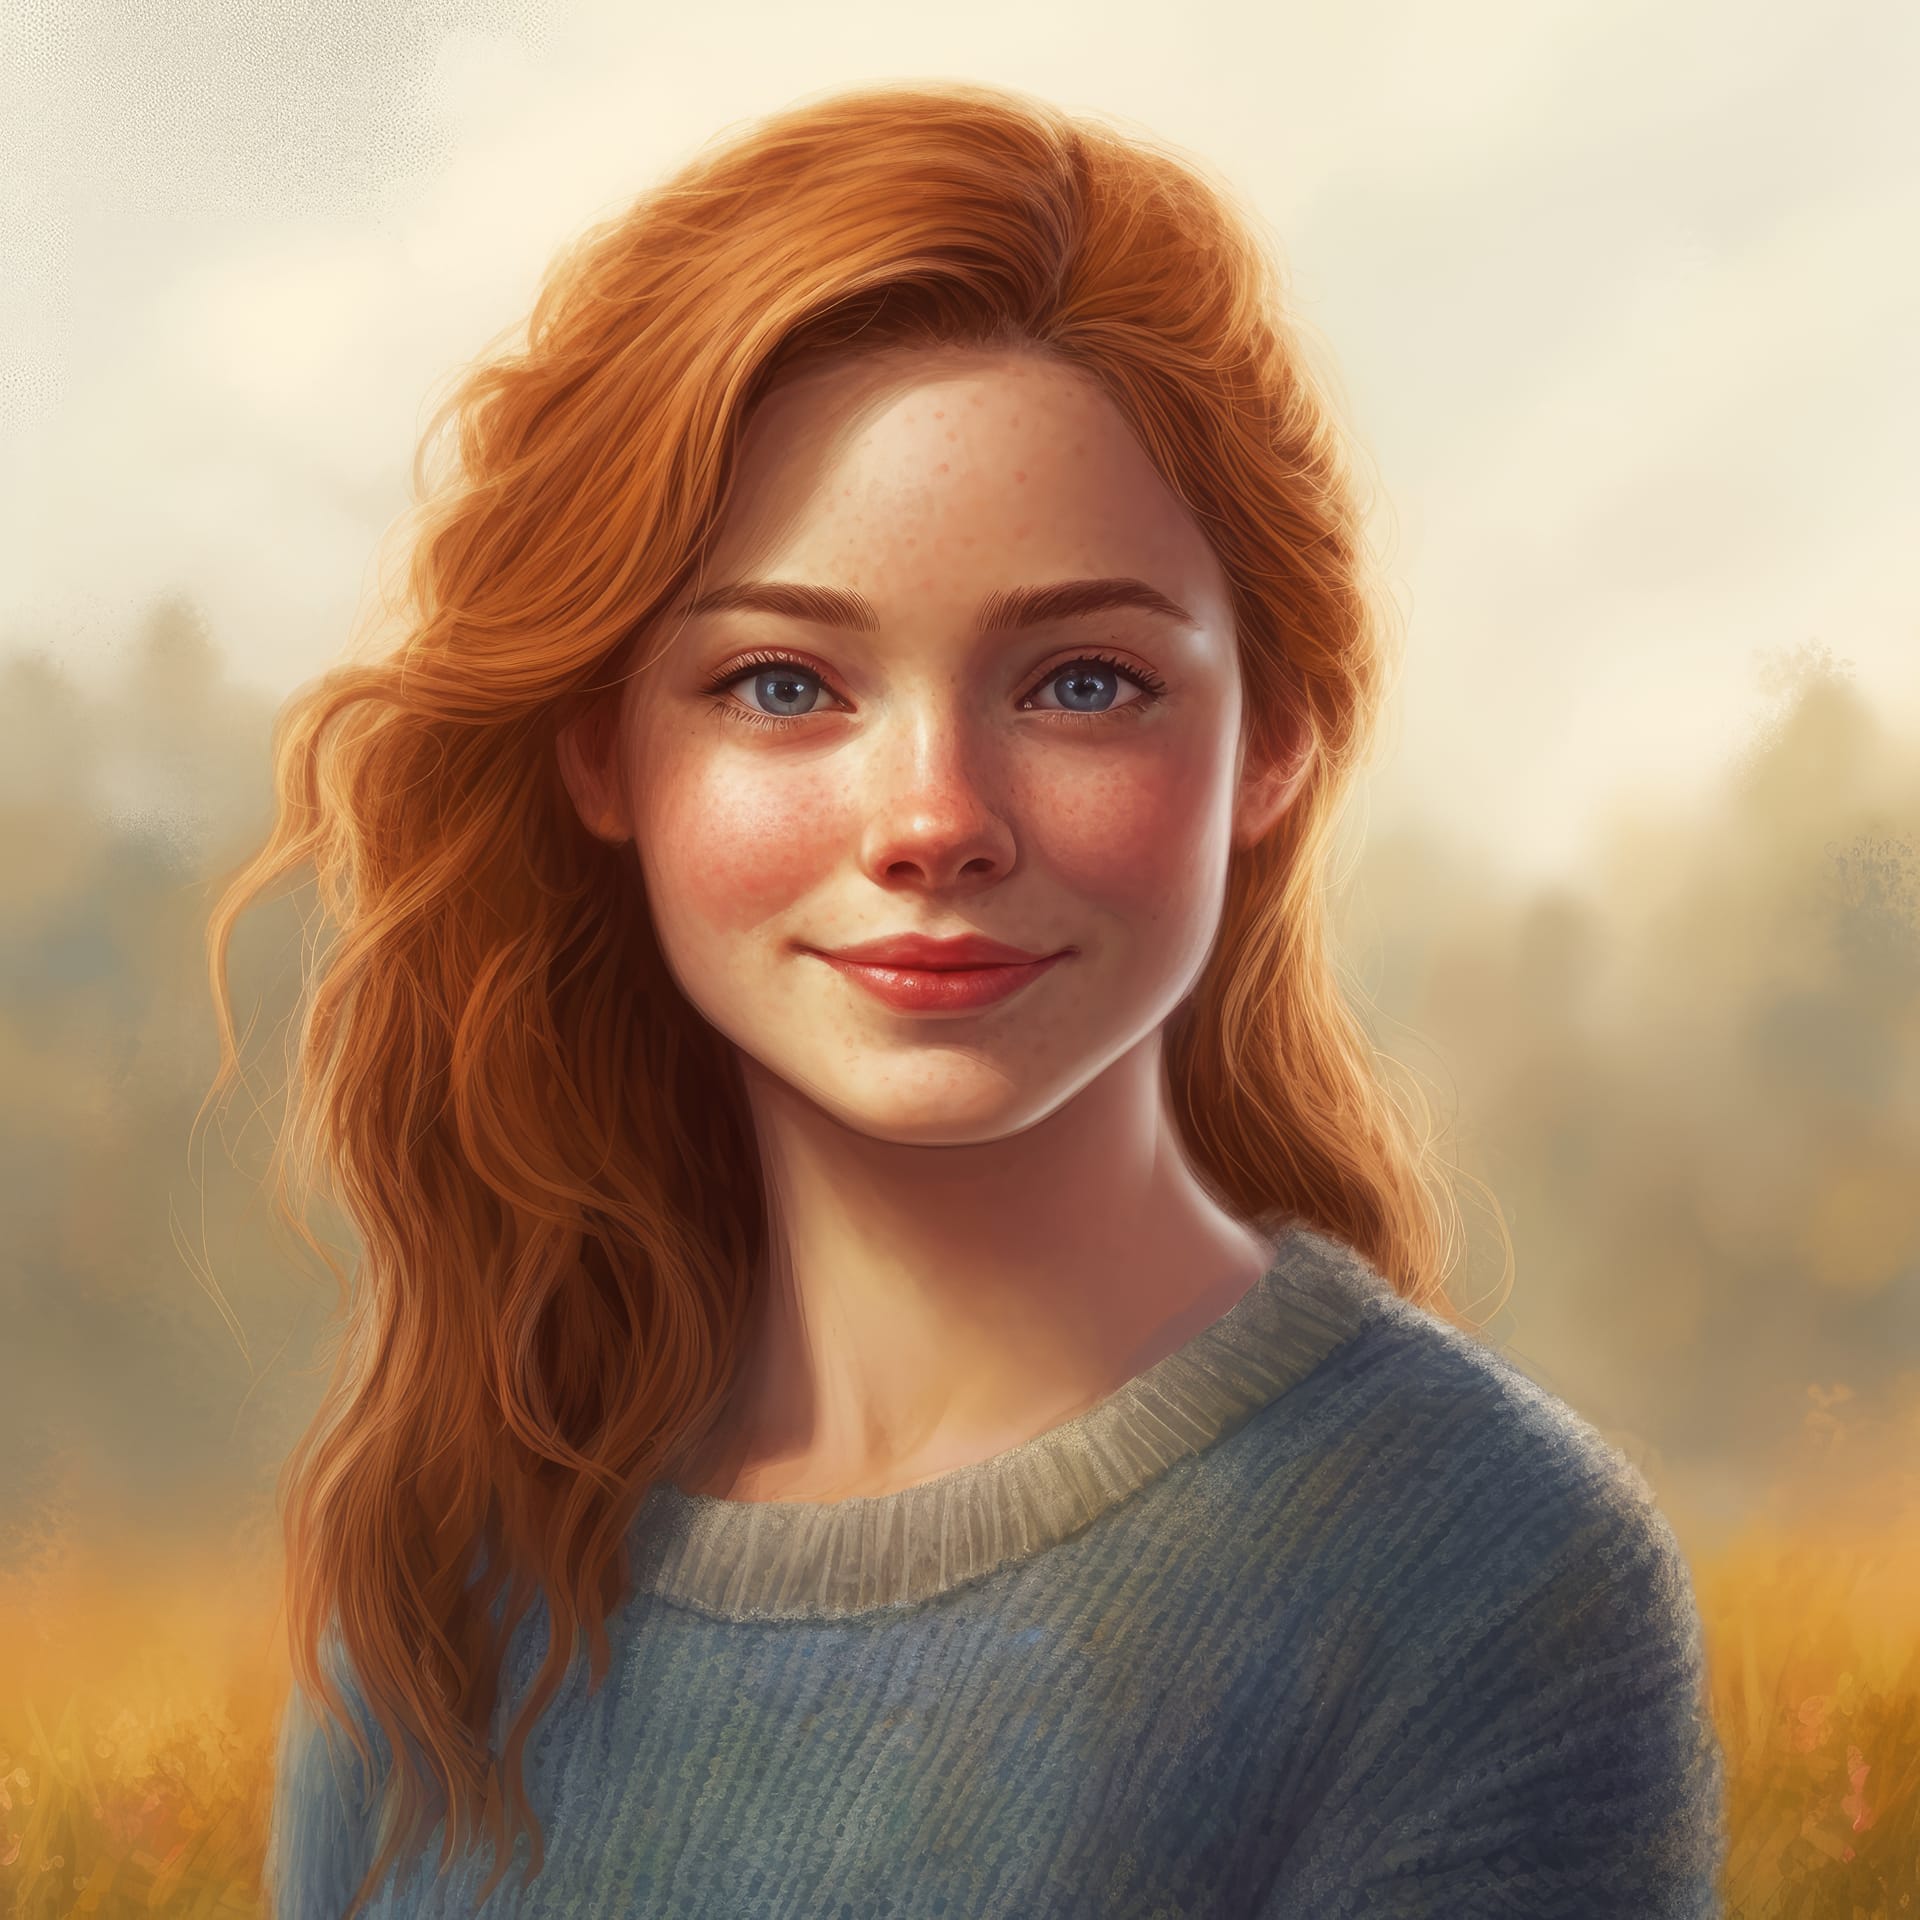 Excellent artwork portrait girl with red hair blue eyes graceful image